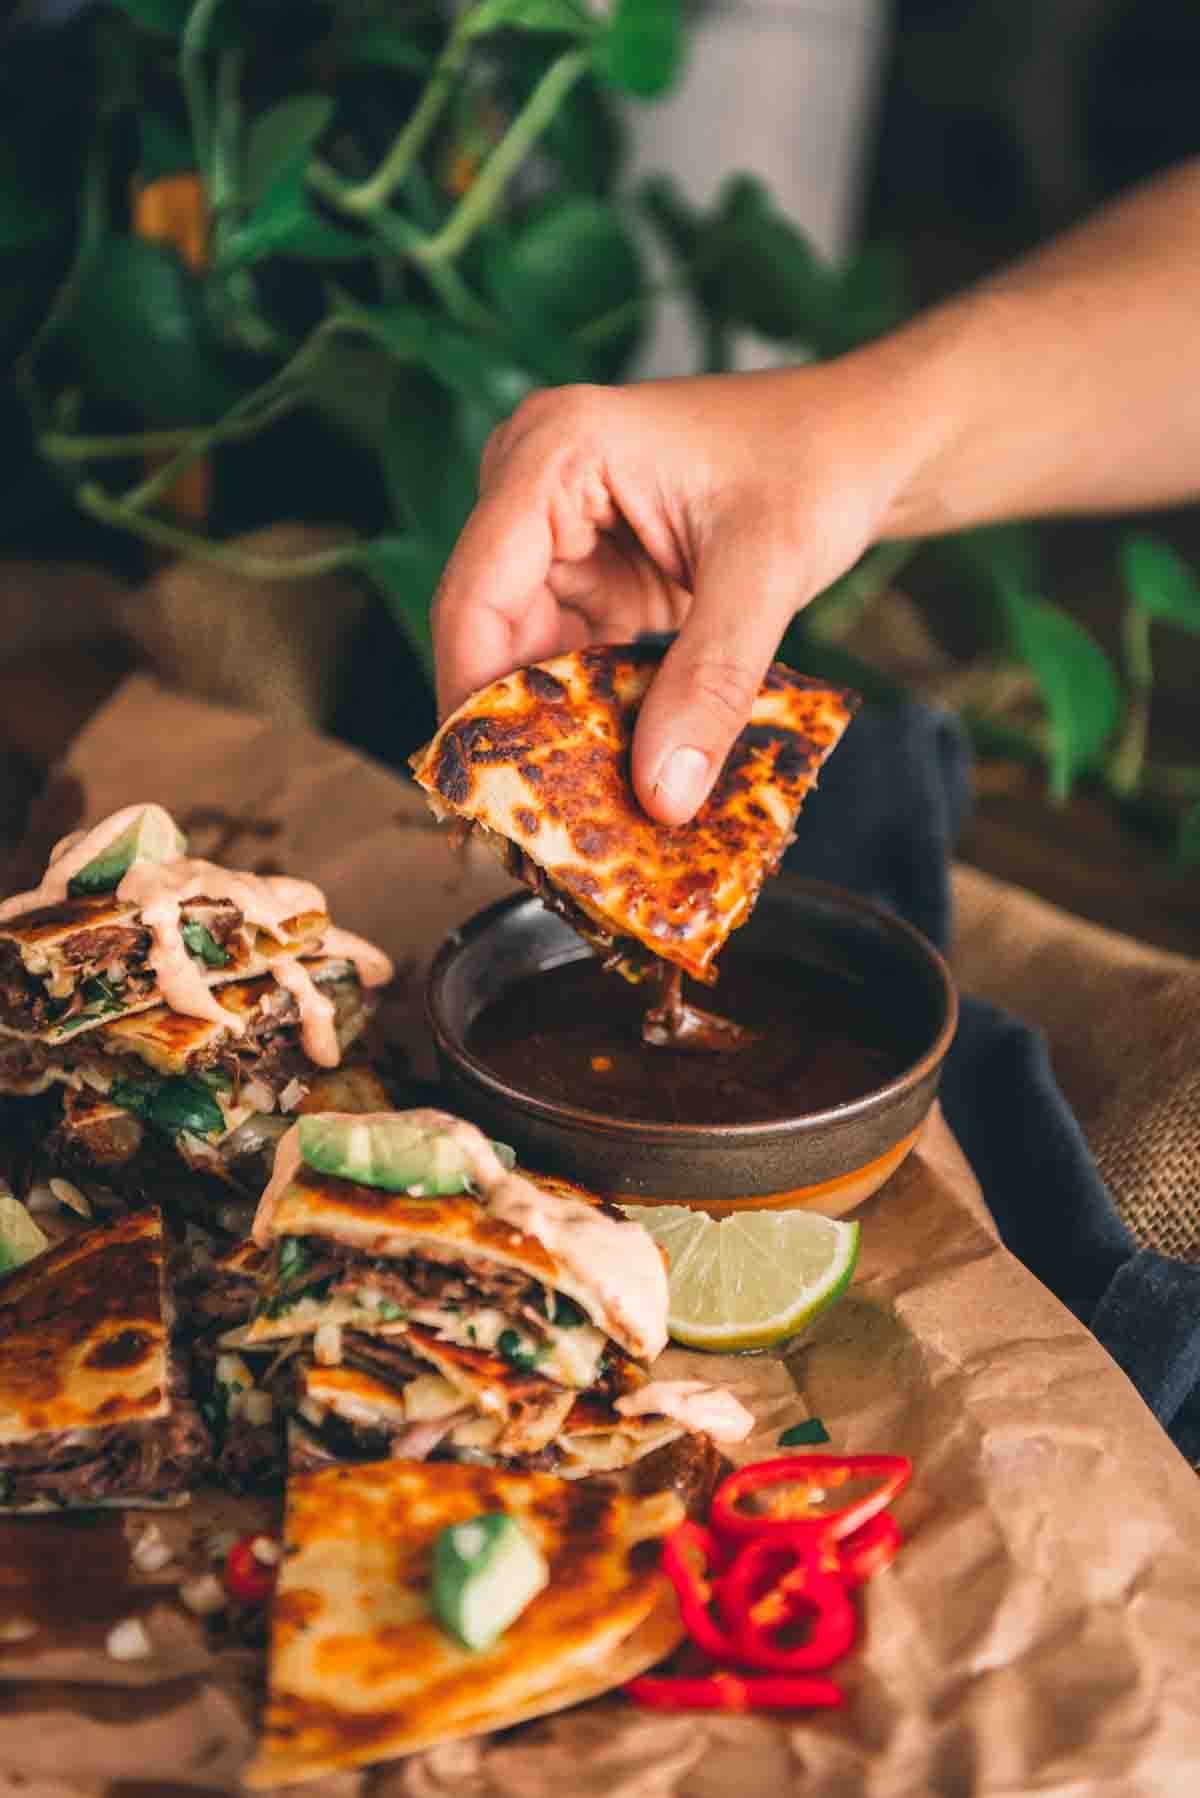 Hand dipping quesadilla wedge into the broth.